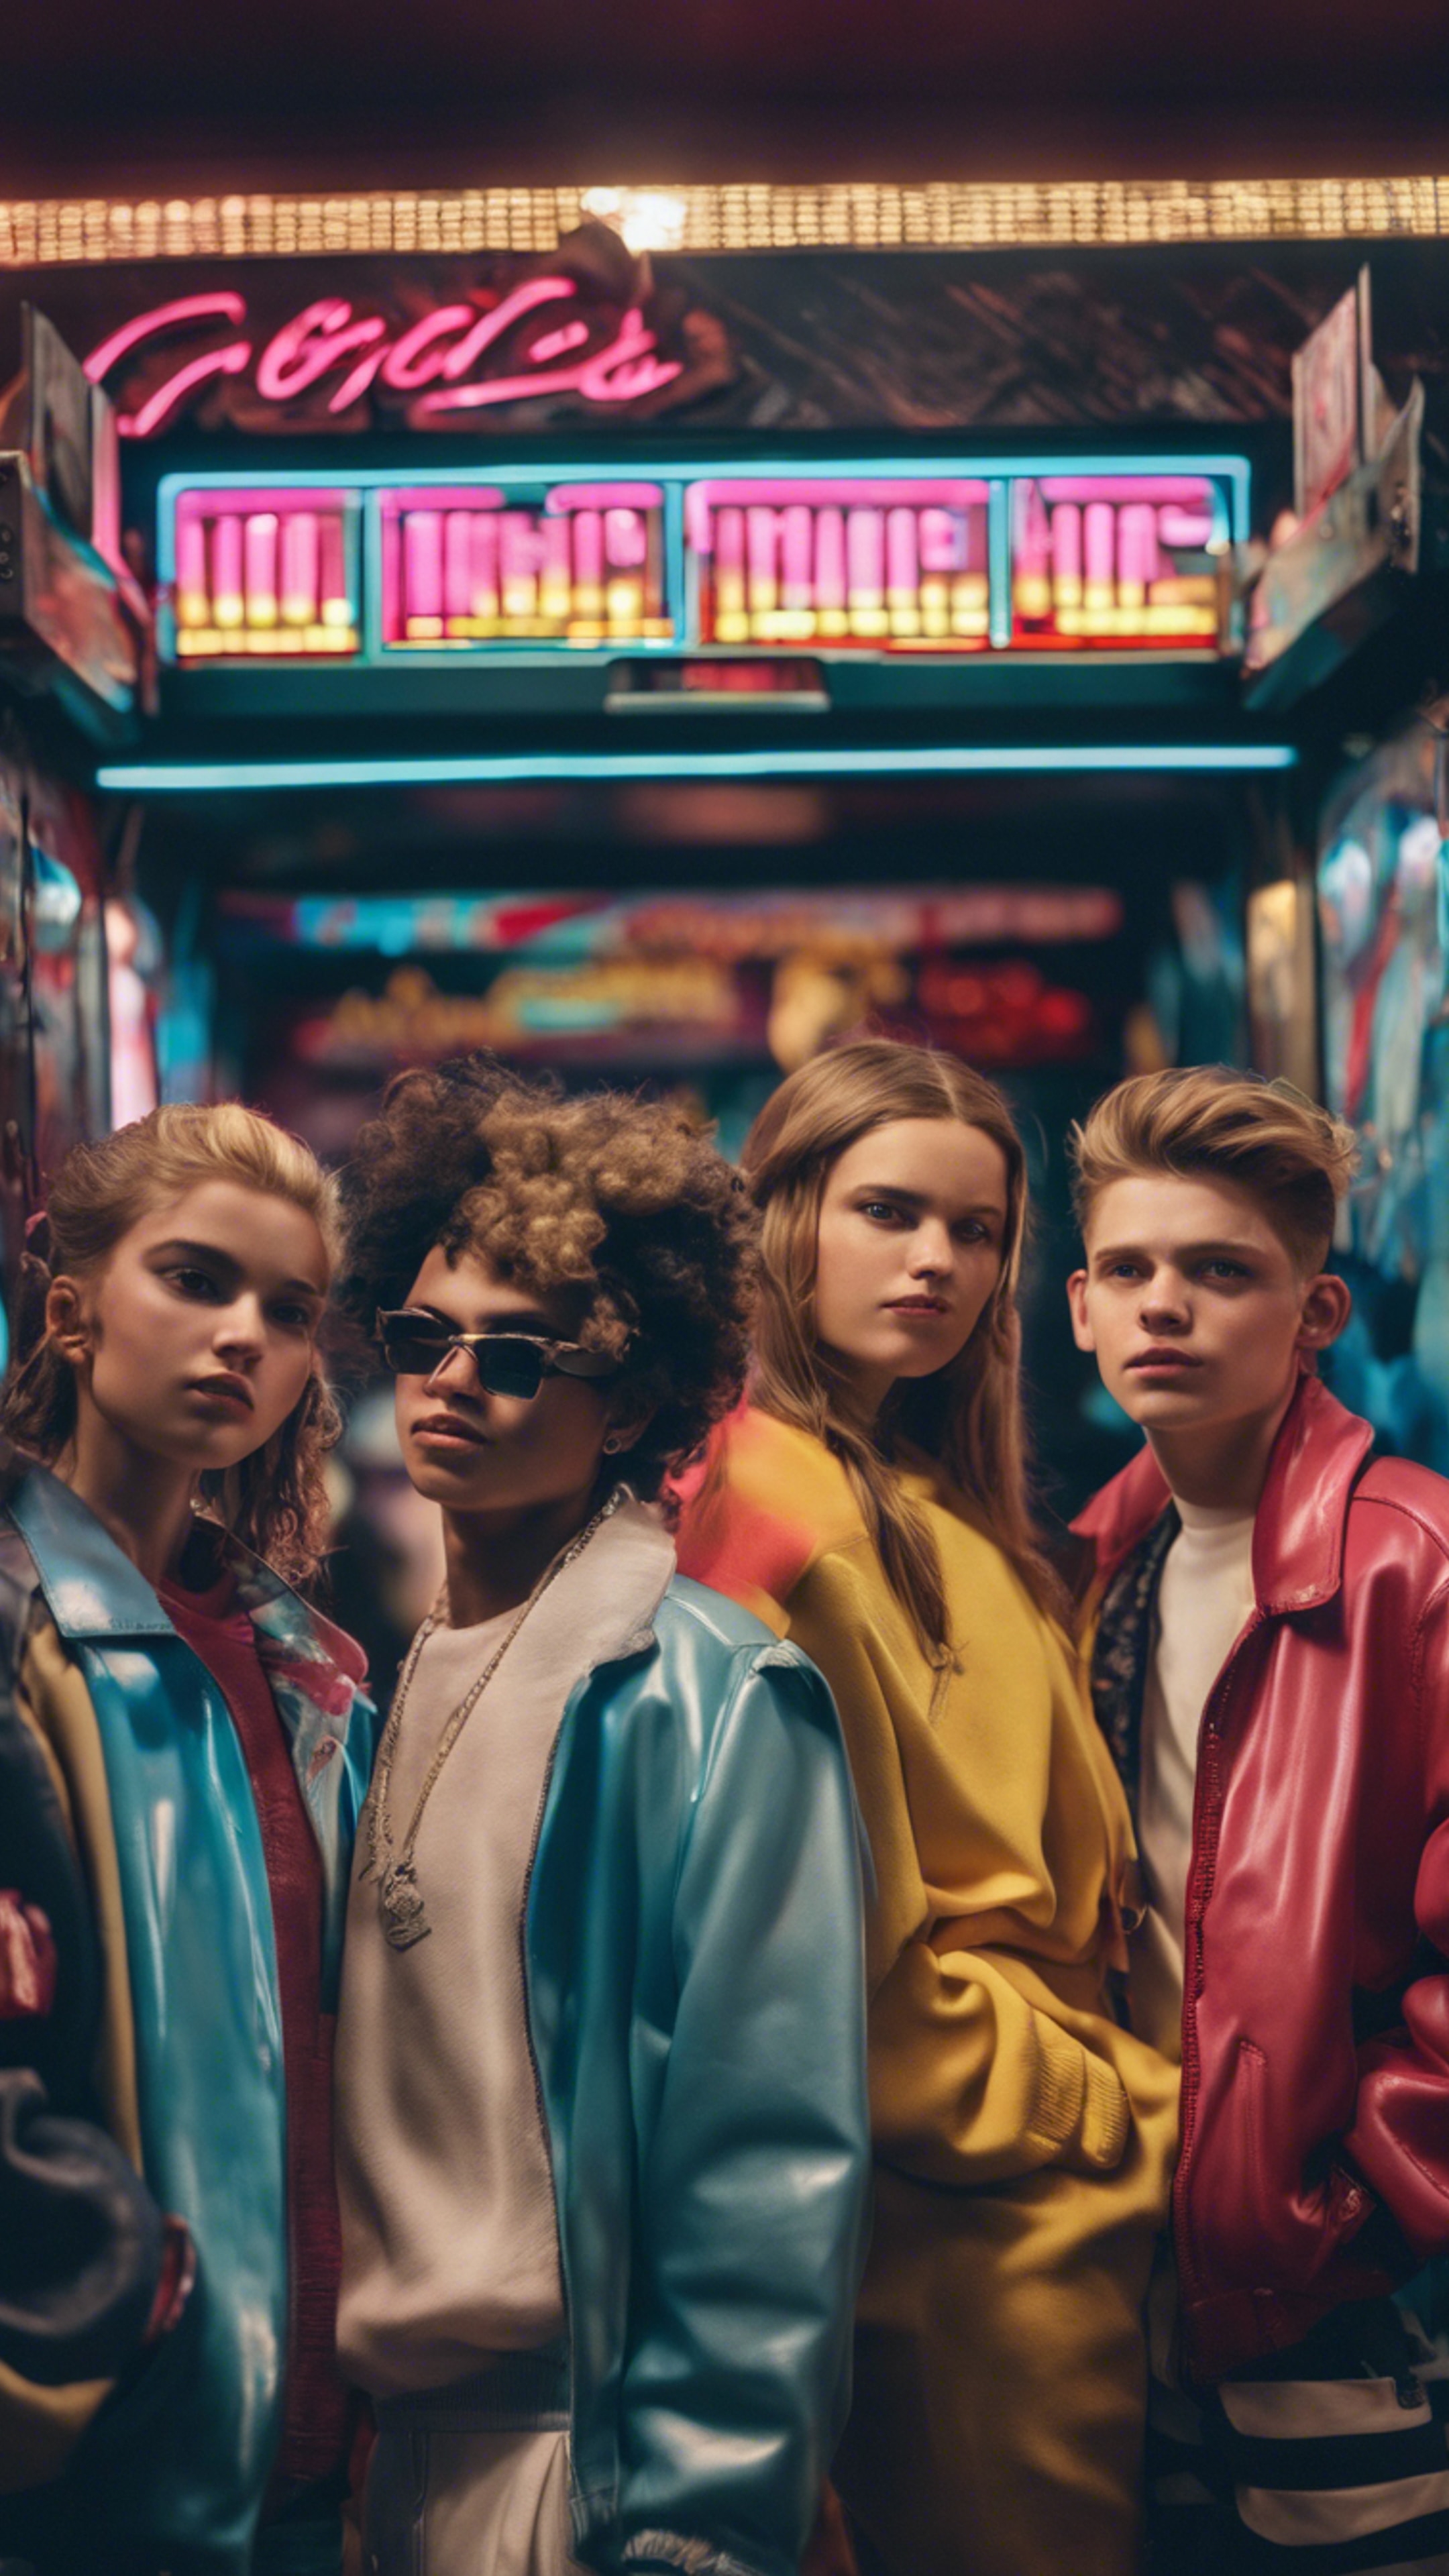 A group of teenagers dressed in iconic 80s fashion, hanging out at an arcade. duvar kağıdı[419df1d215924a4a865f]